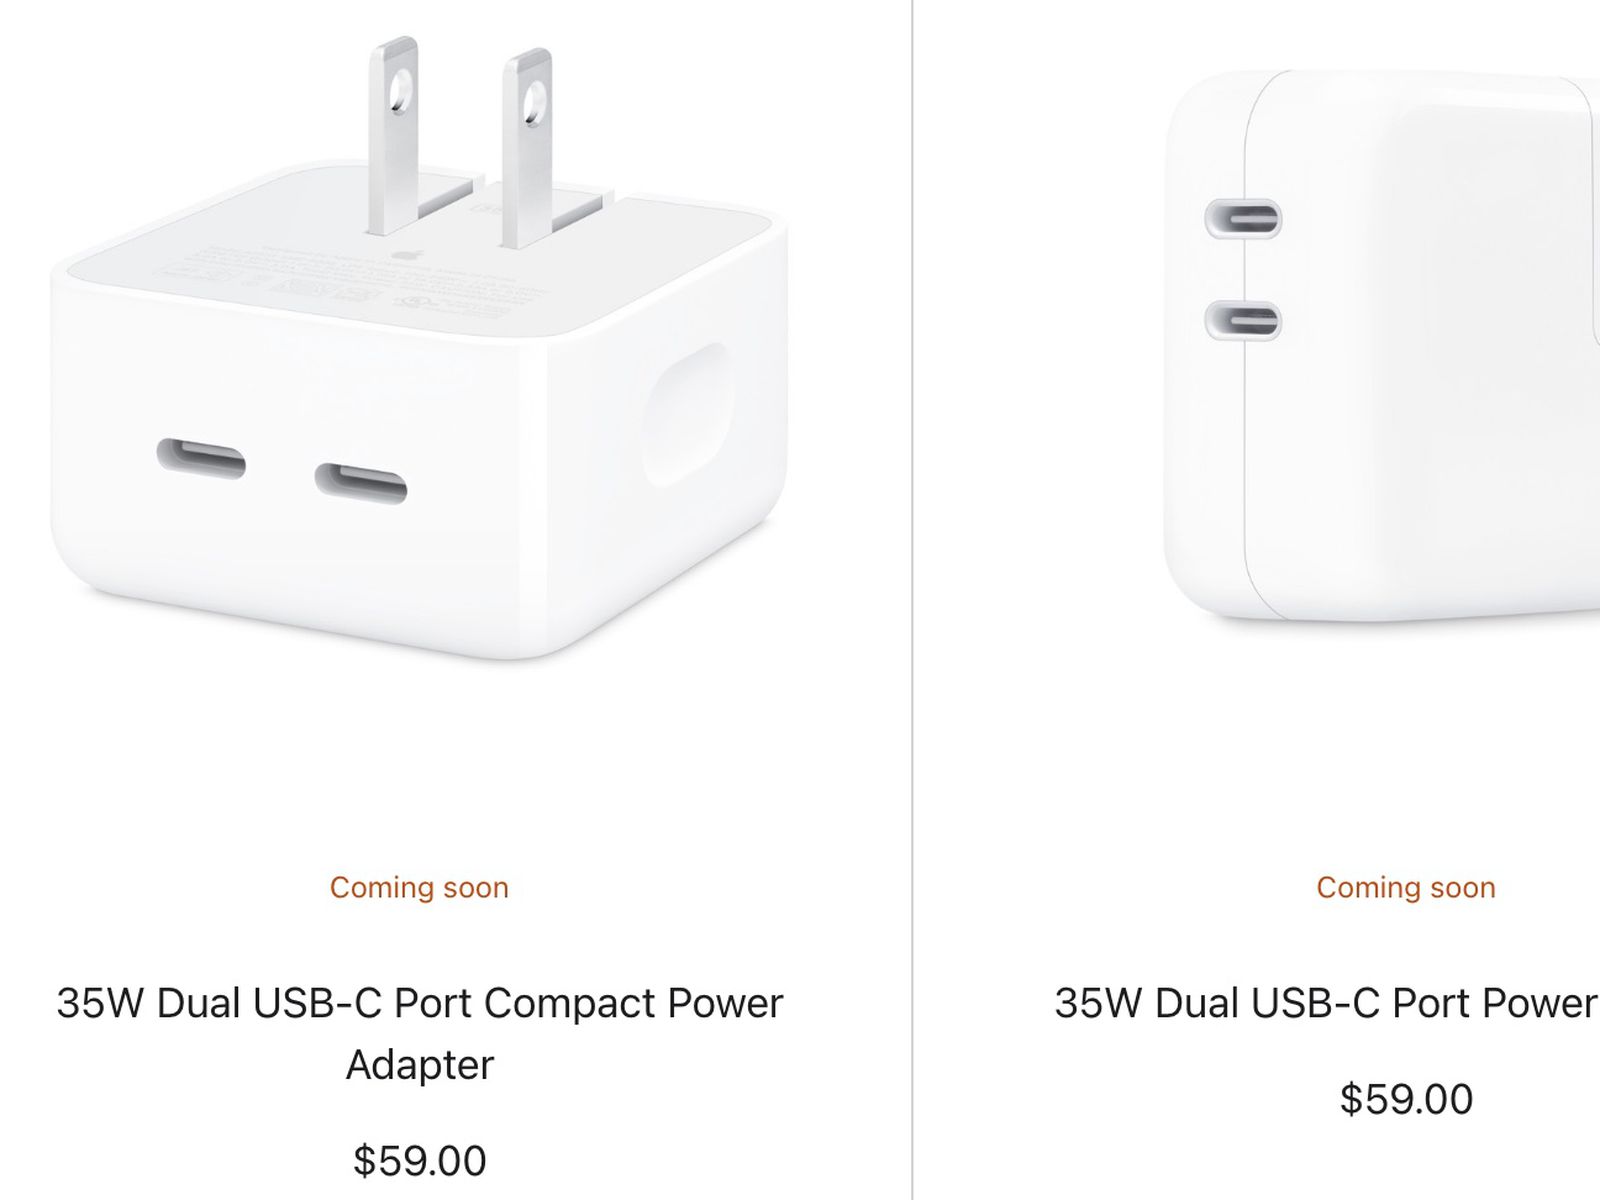 Apple Releasing 35W Power Adapter With Dual USB-C Ports in